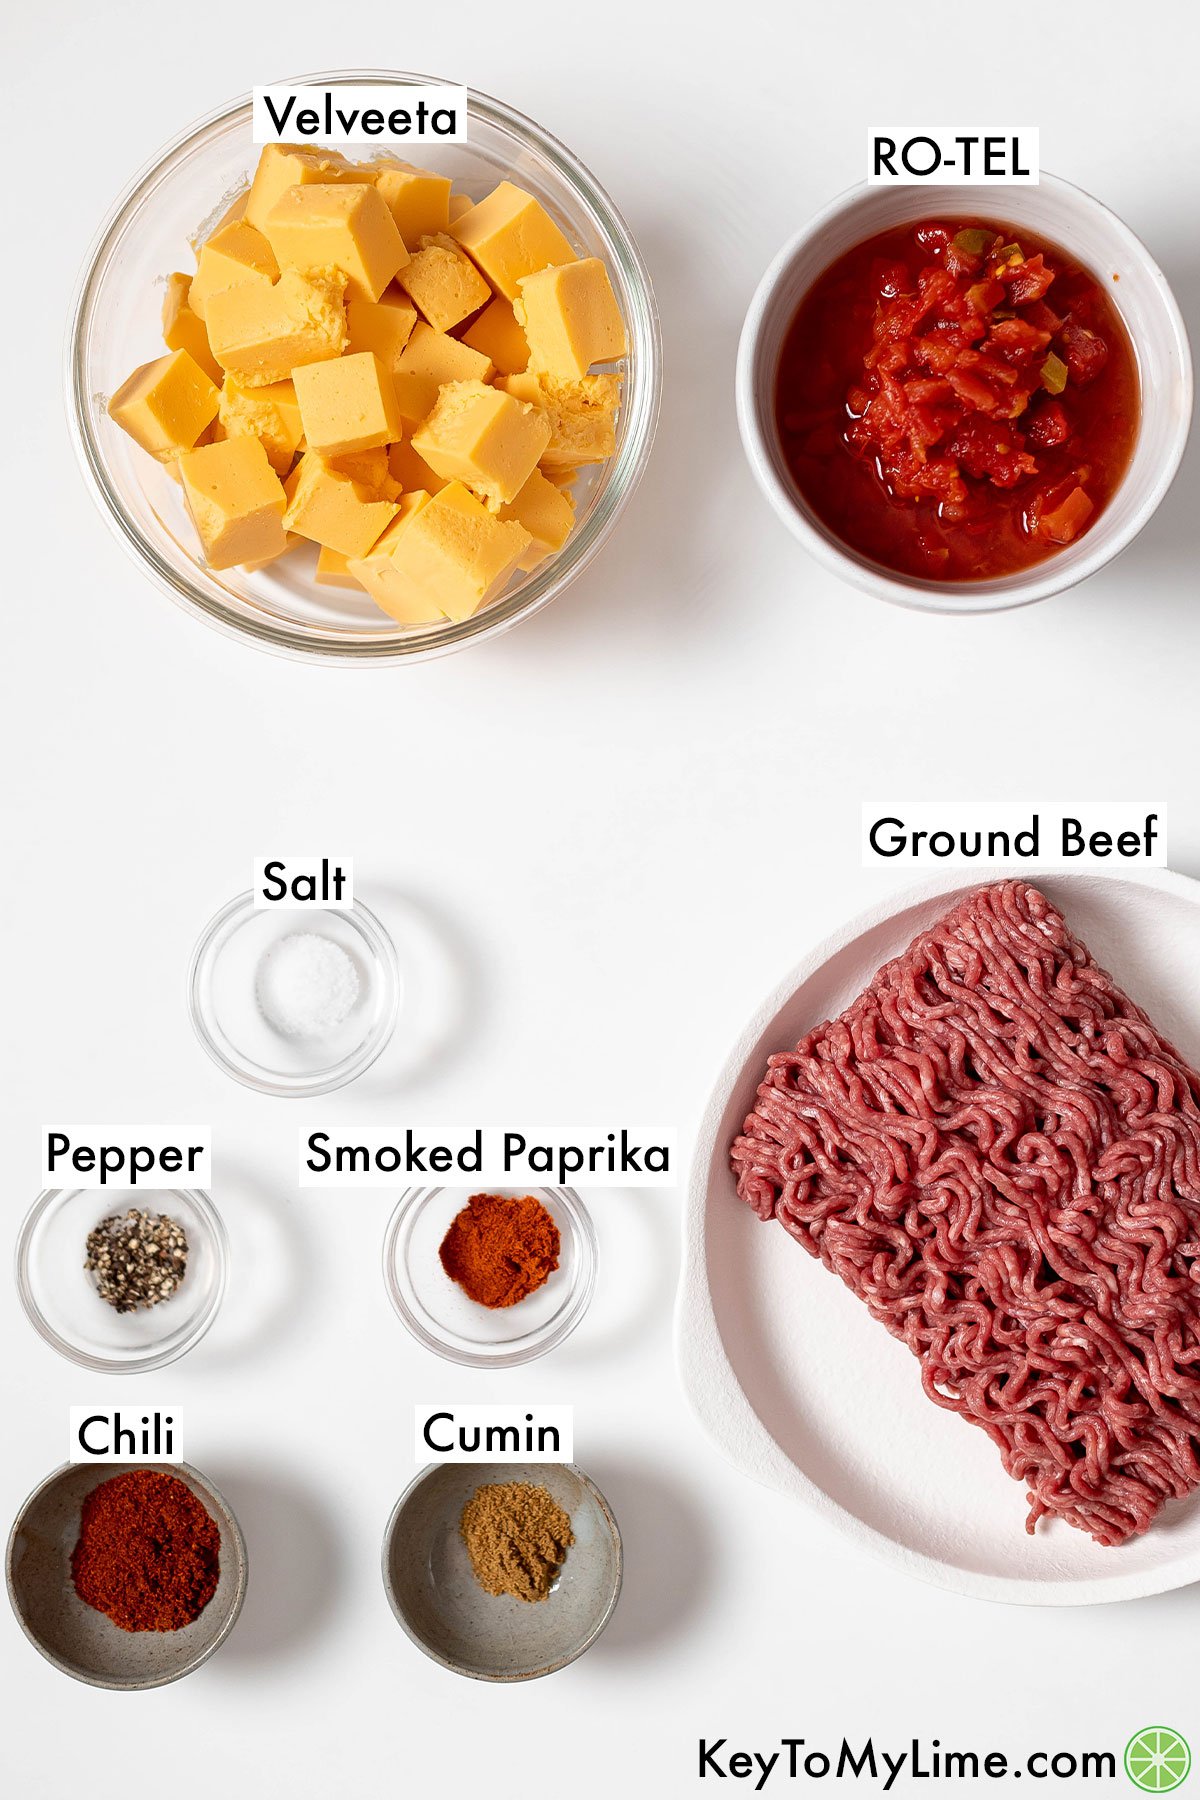 The labeled ingredients for Rotel dip.